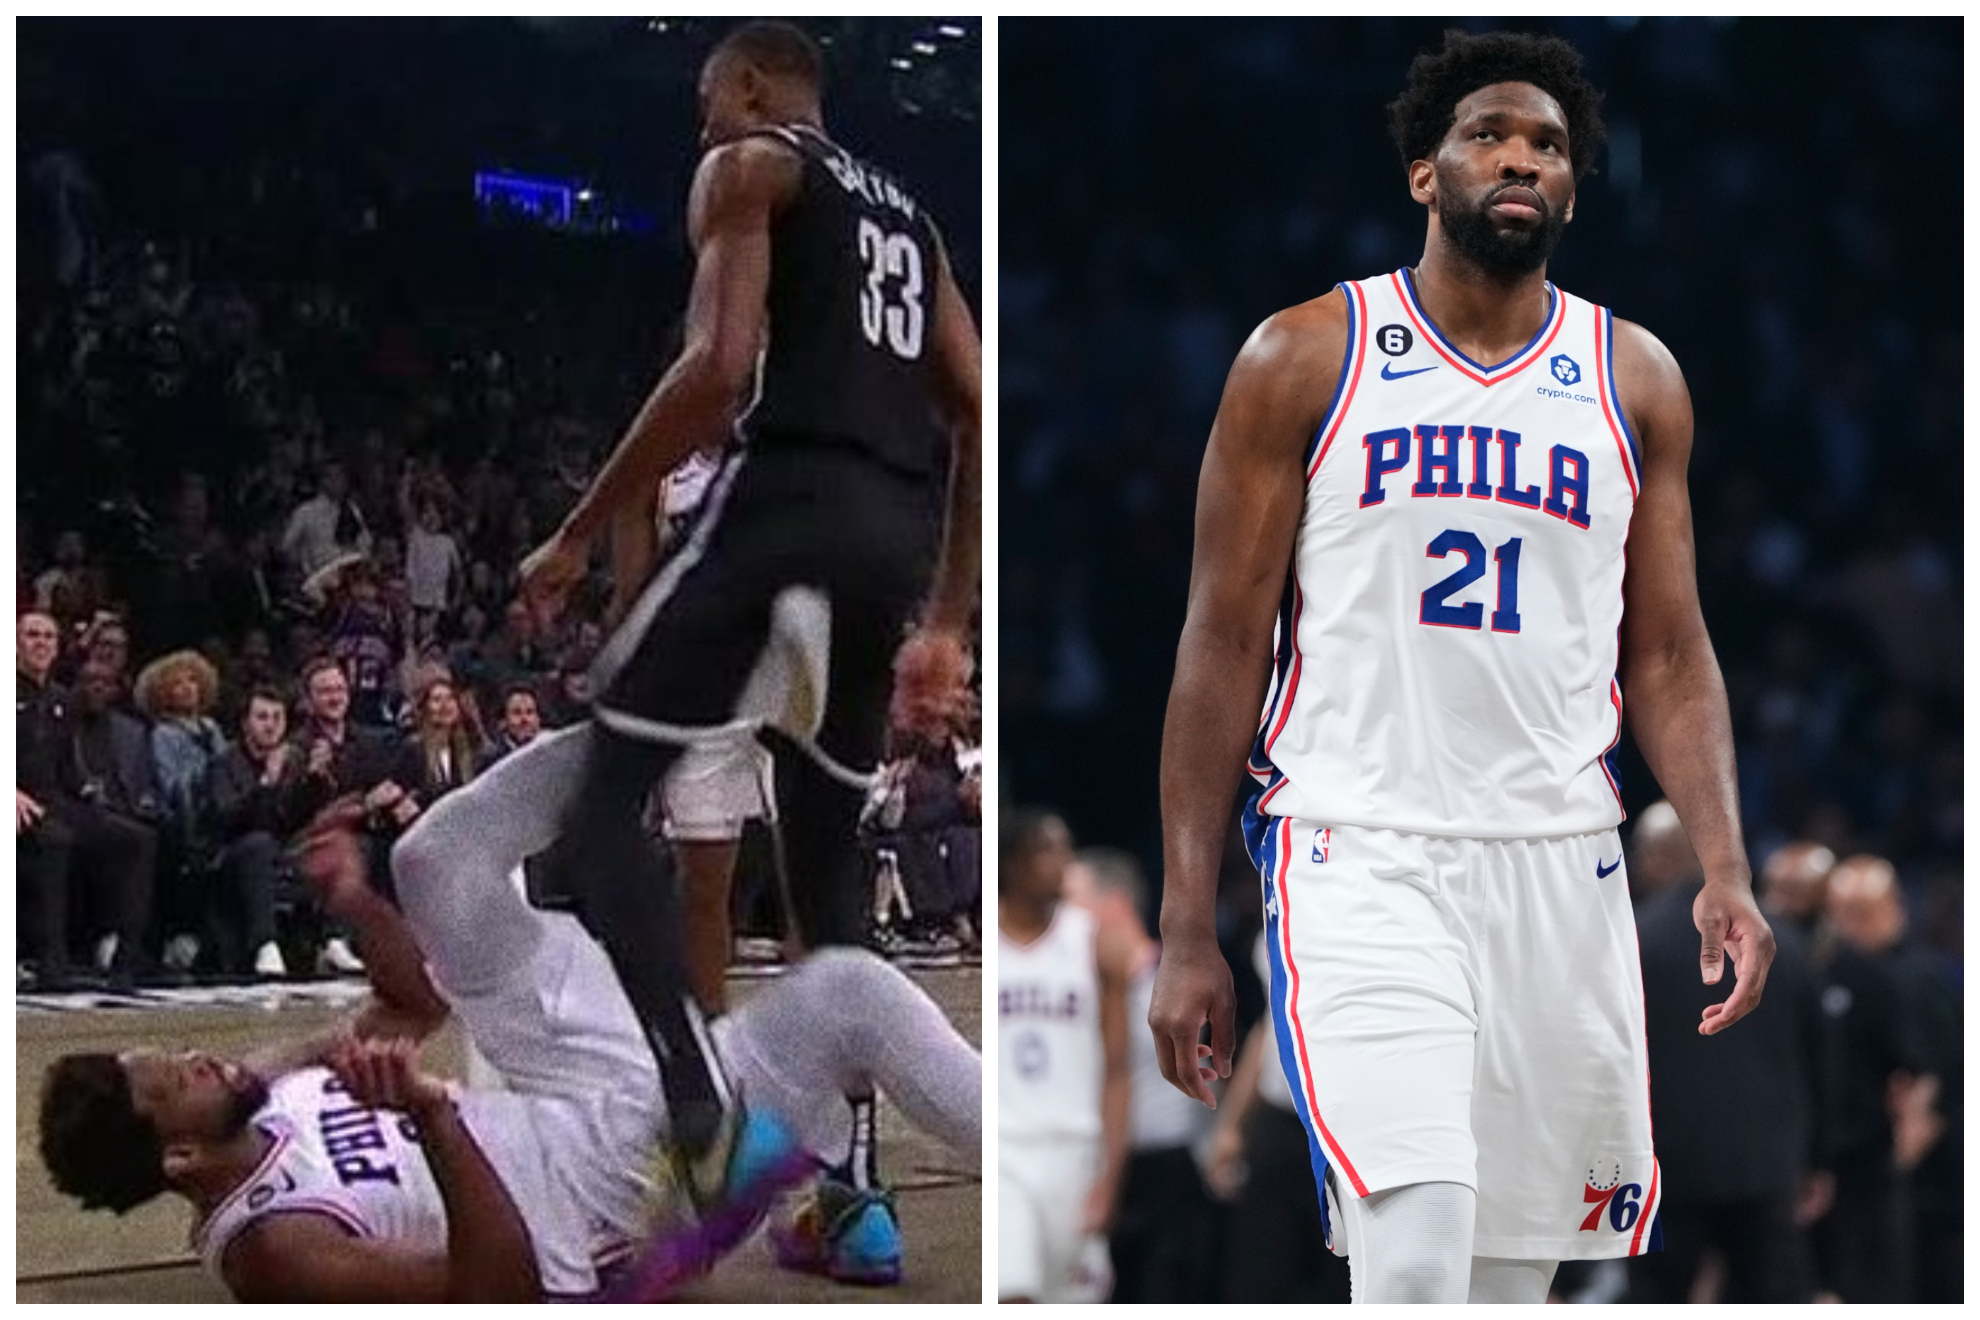 Joel Embiid is in the eye of the storm over his Flagrant 1 foul on Game 3.